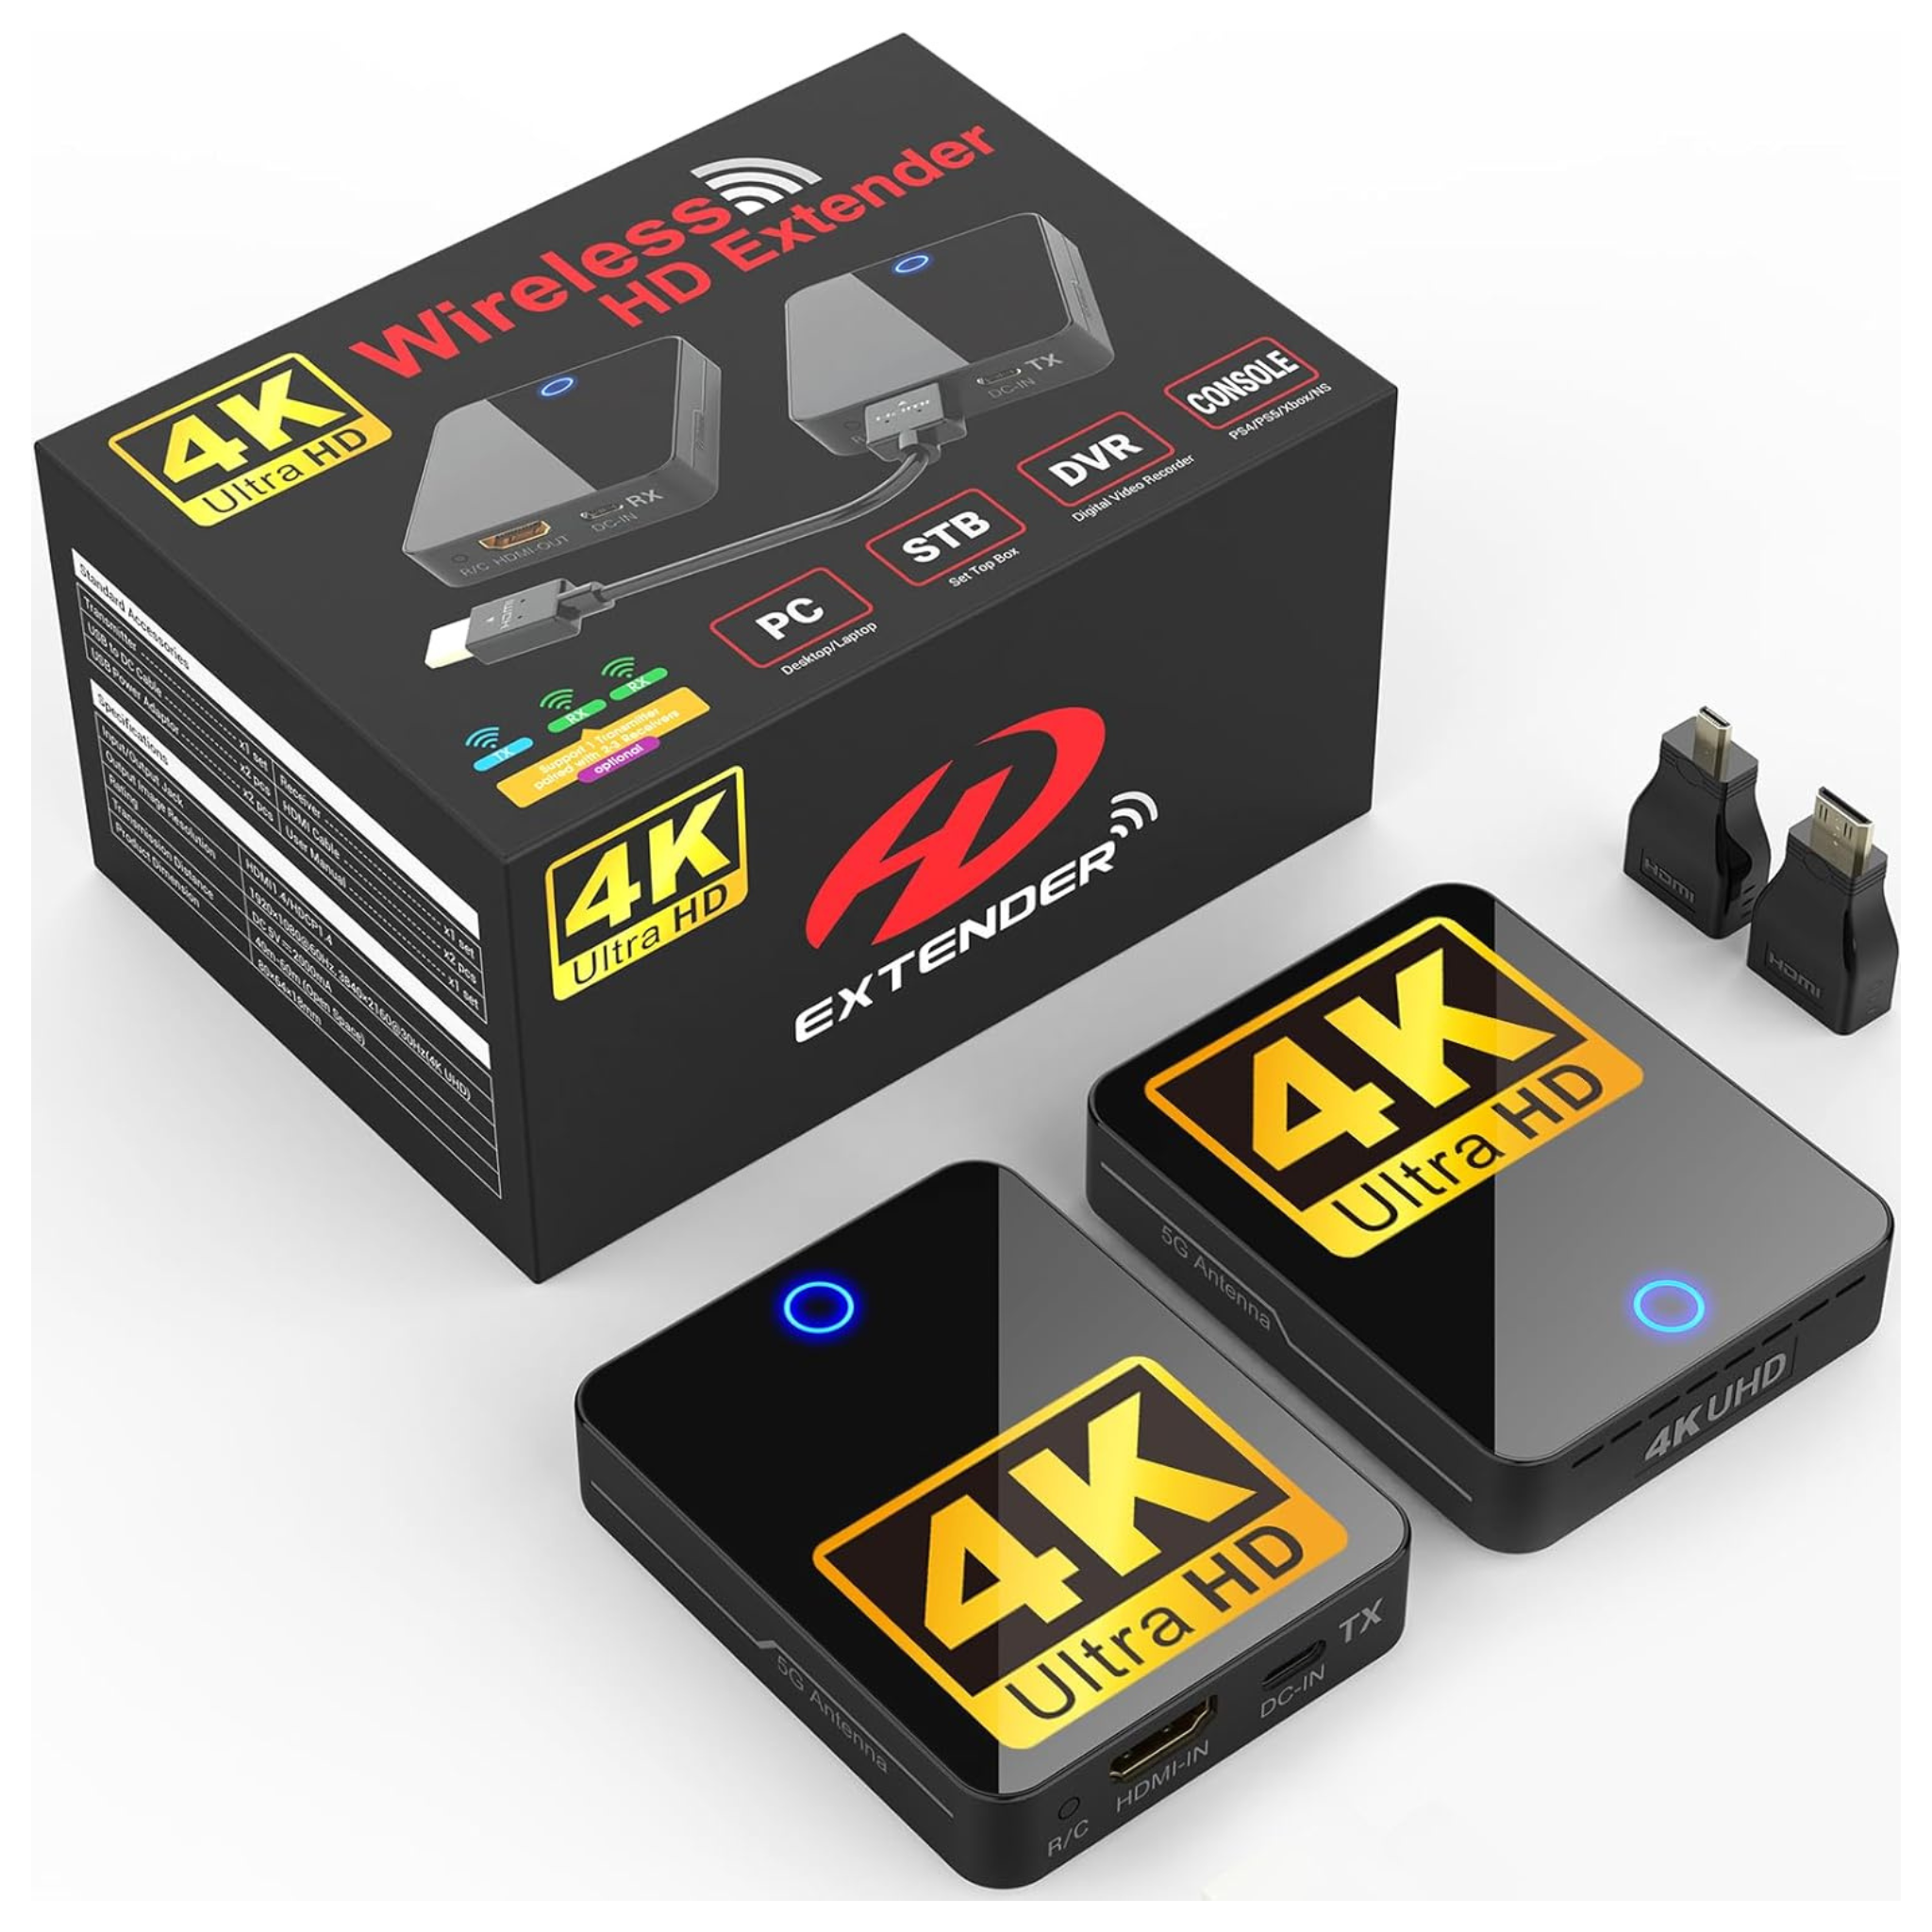 BMOSTE 4K 2160P Wireless HDMI Transmitter and Receiver